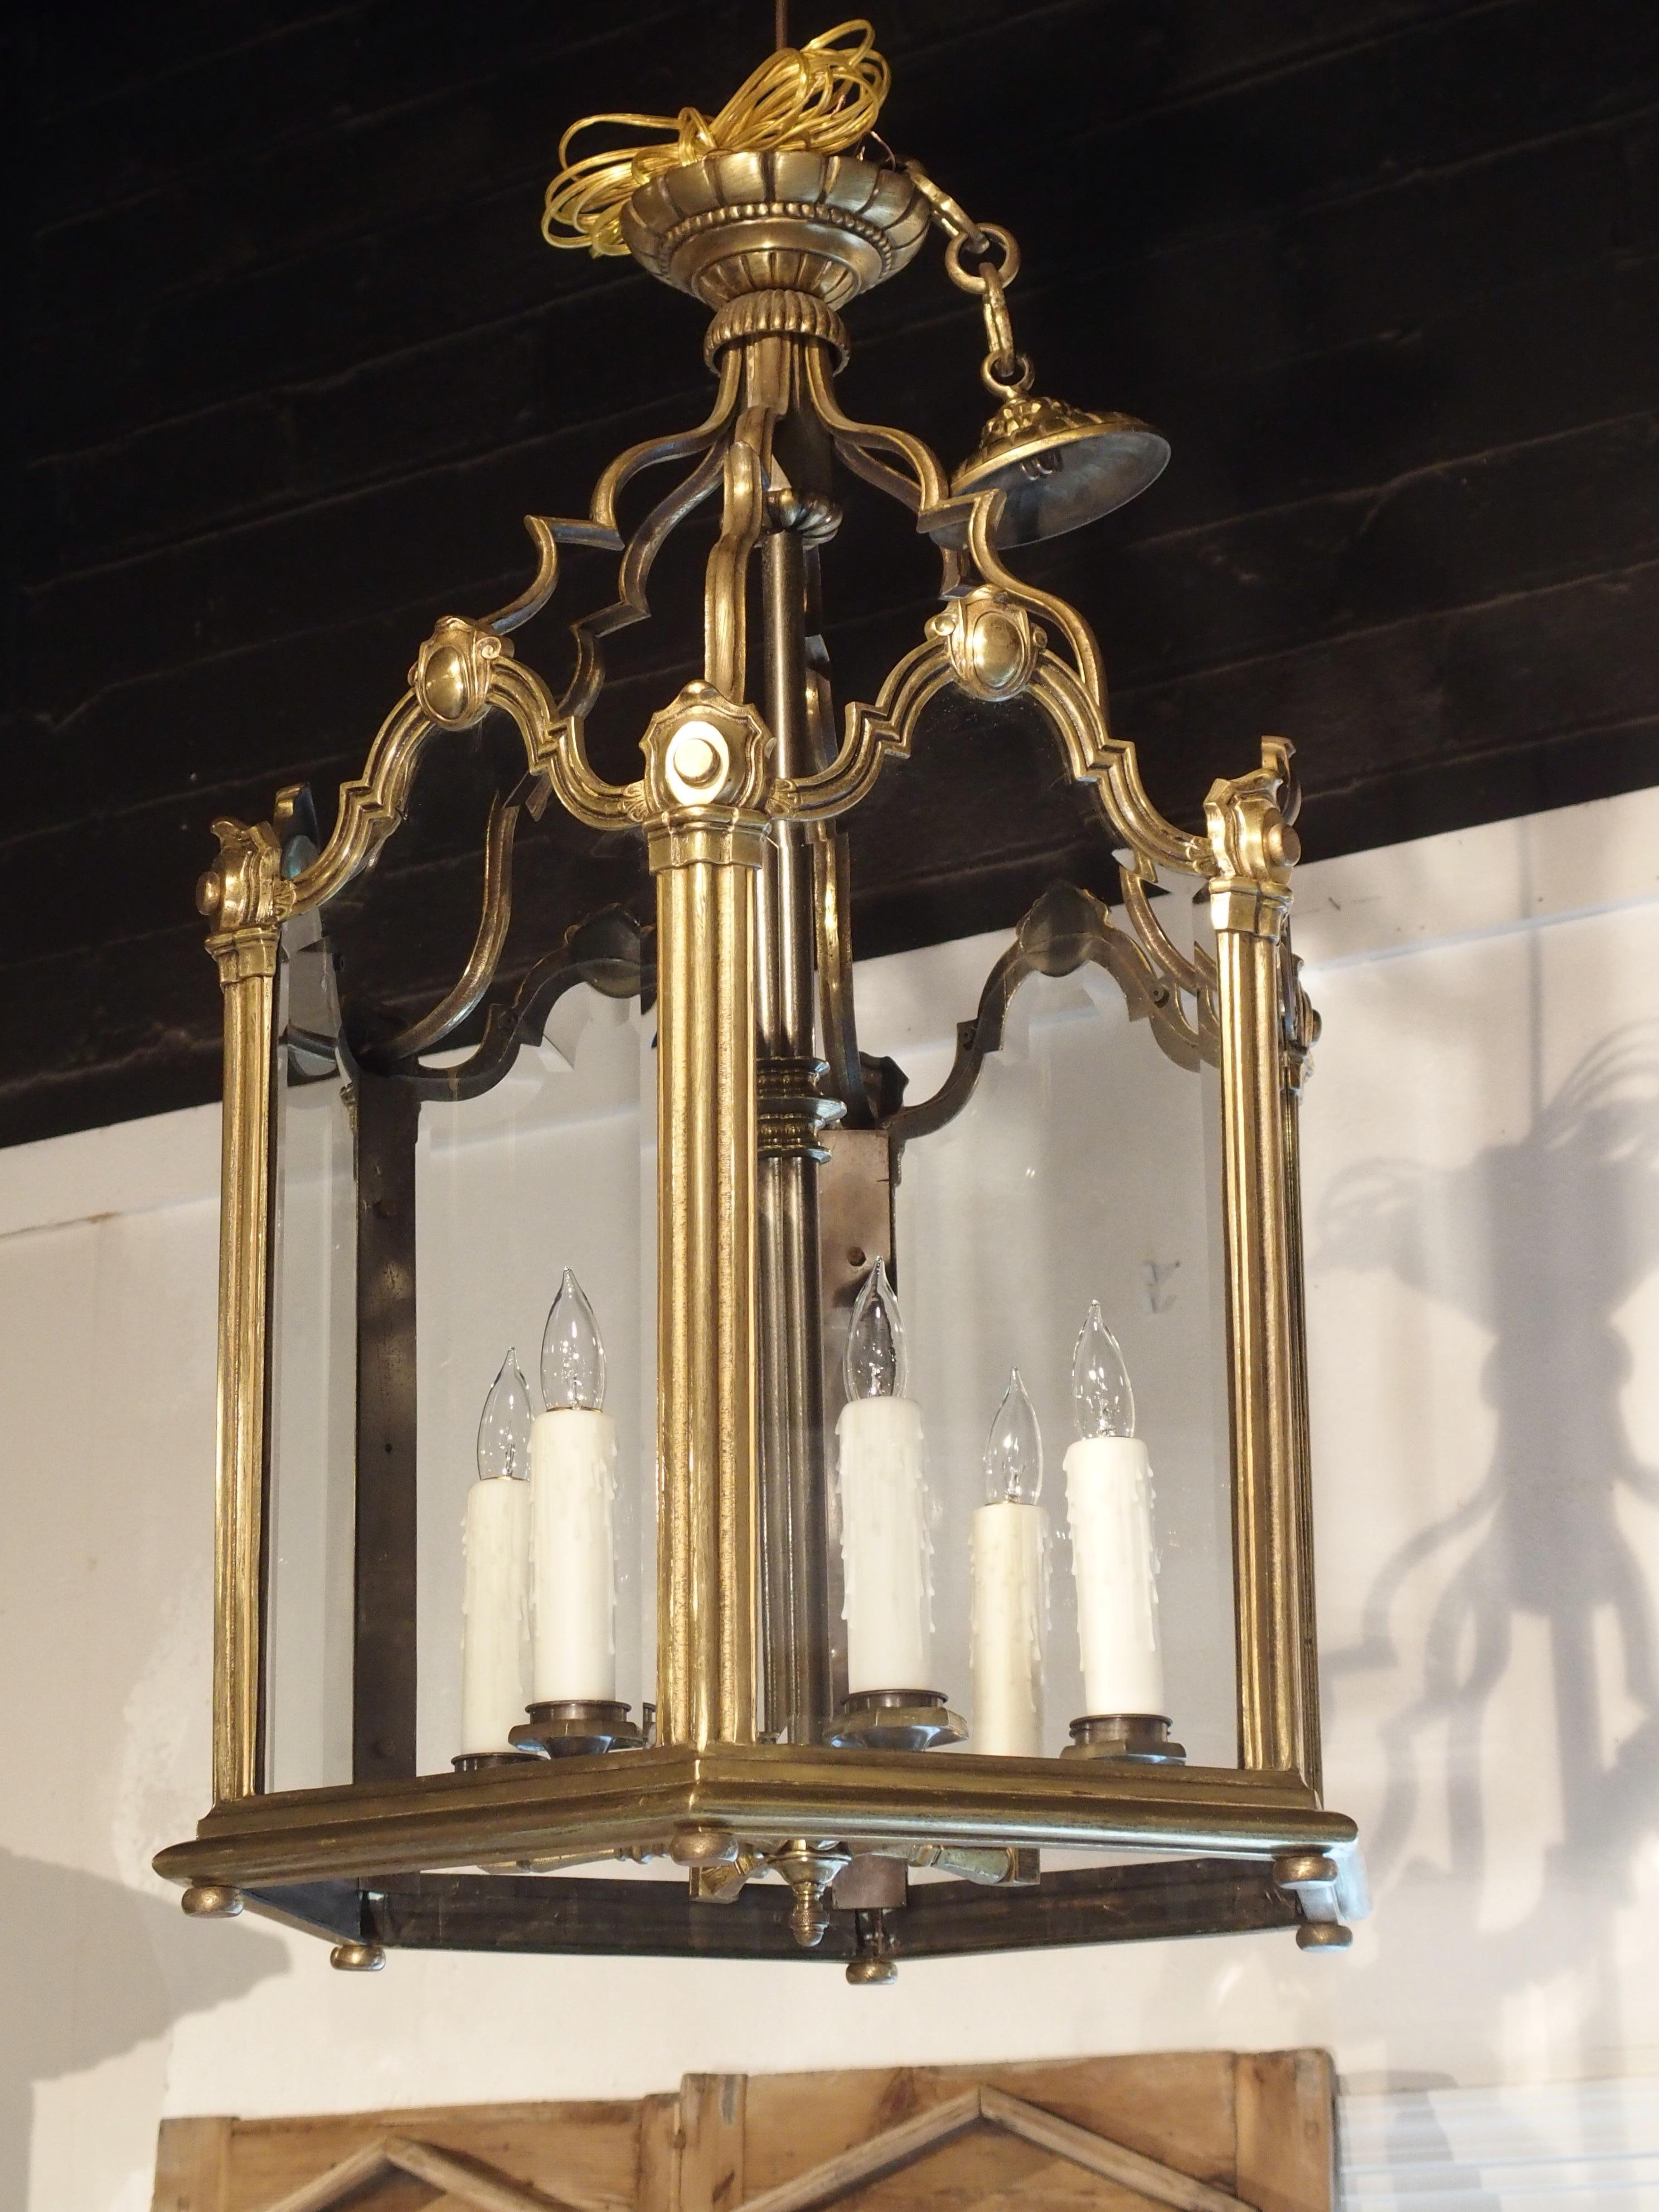 This elegant, large French bronze lantern was produced circa 1890 in the style of Louis XV. The glass panes have been arranged in a 25-inch diameter hexagon with a central cluster of six lights.

The top of the beveled-edge glass is shaped and